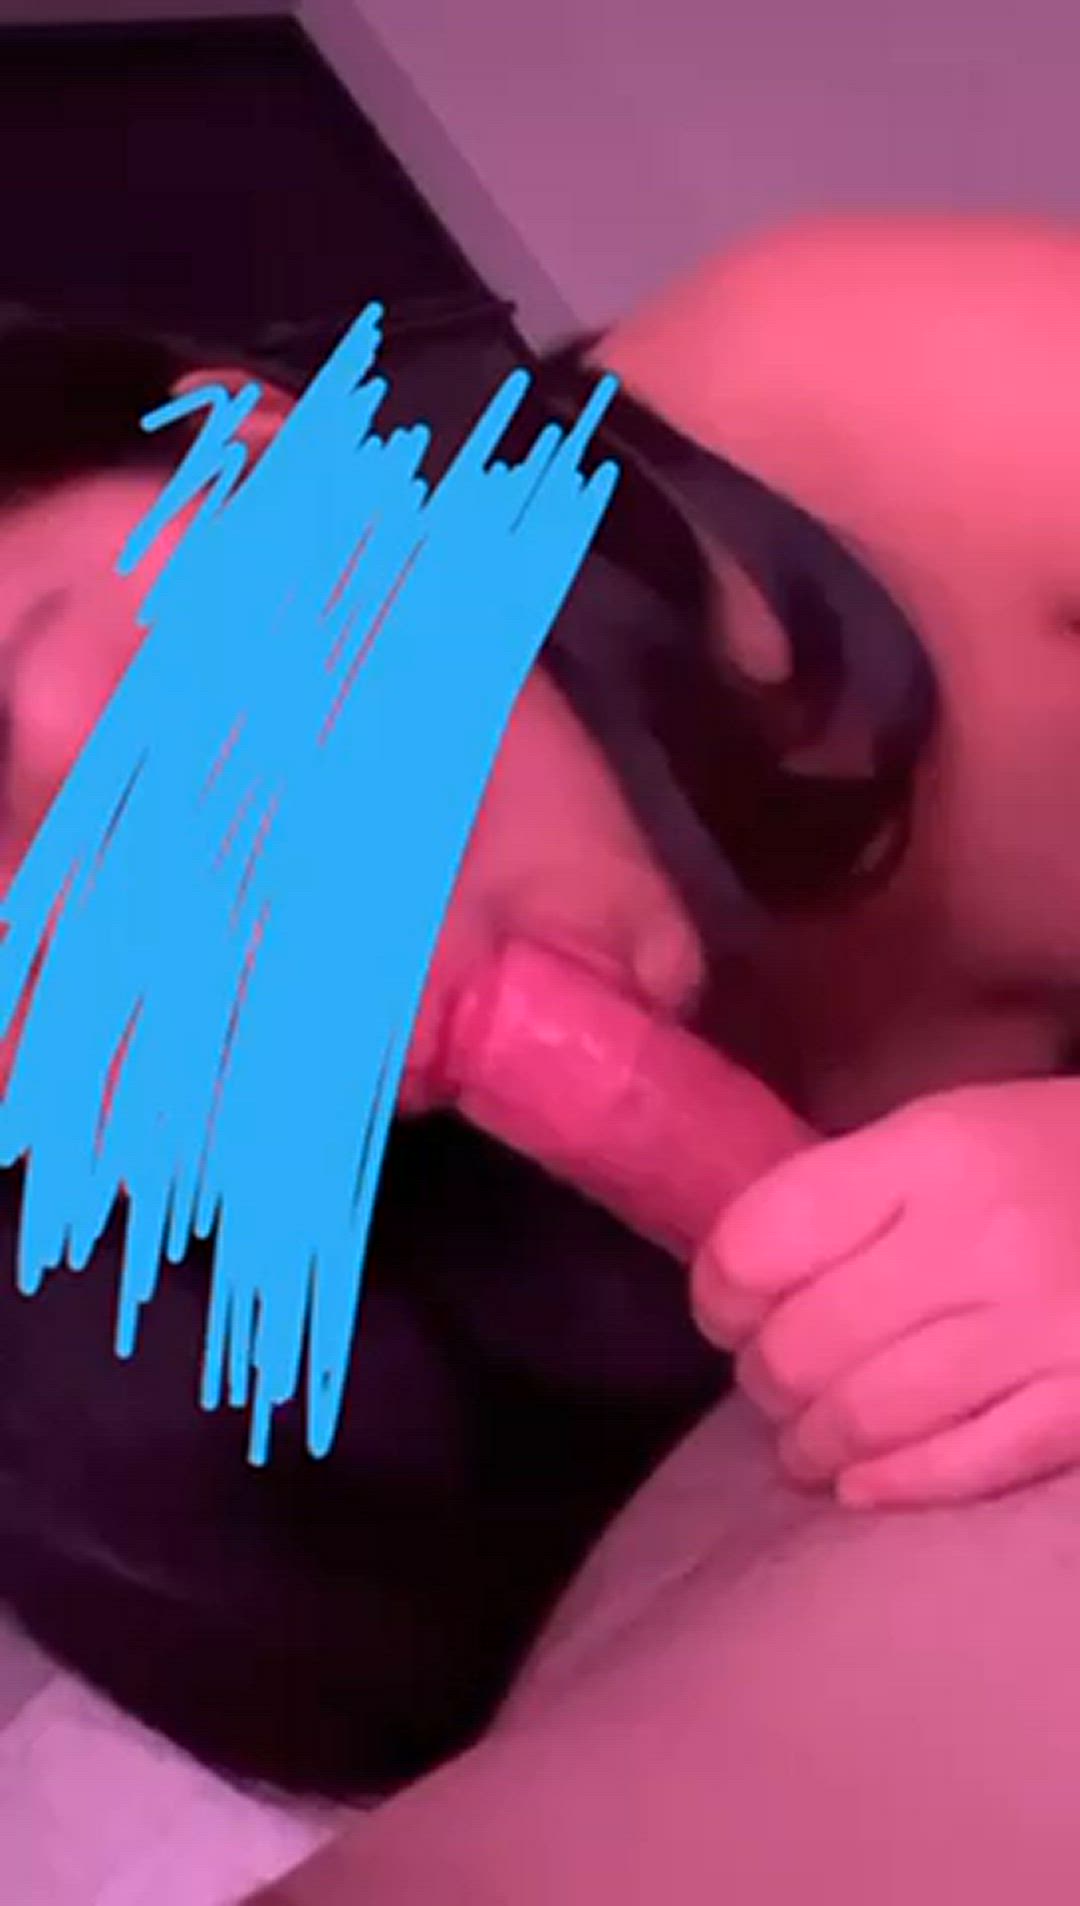 Amateur porn video with onlyfans model thatthickhog <strong>@diaryof_mnj</strong>